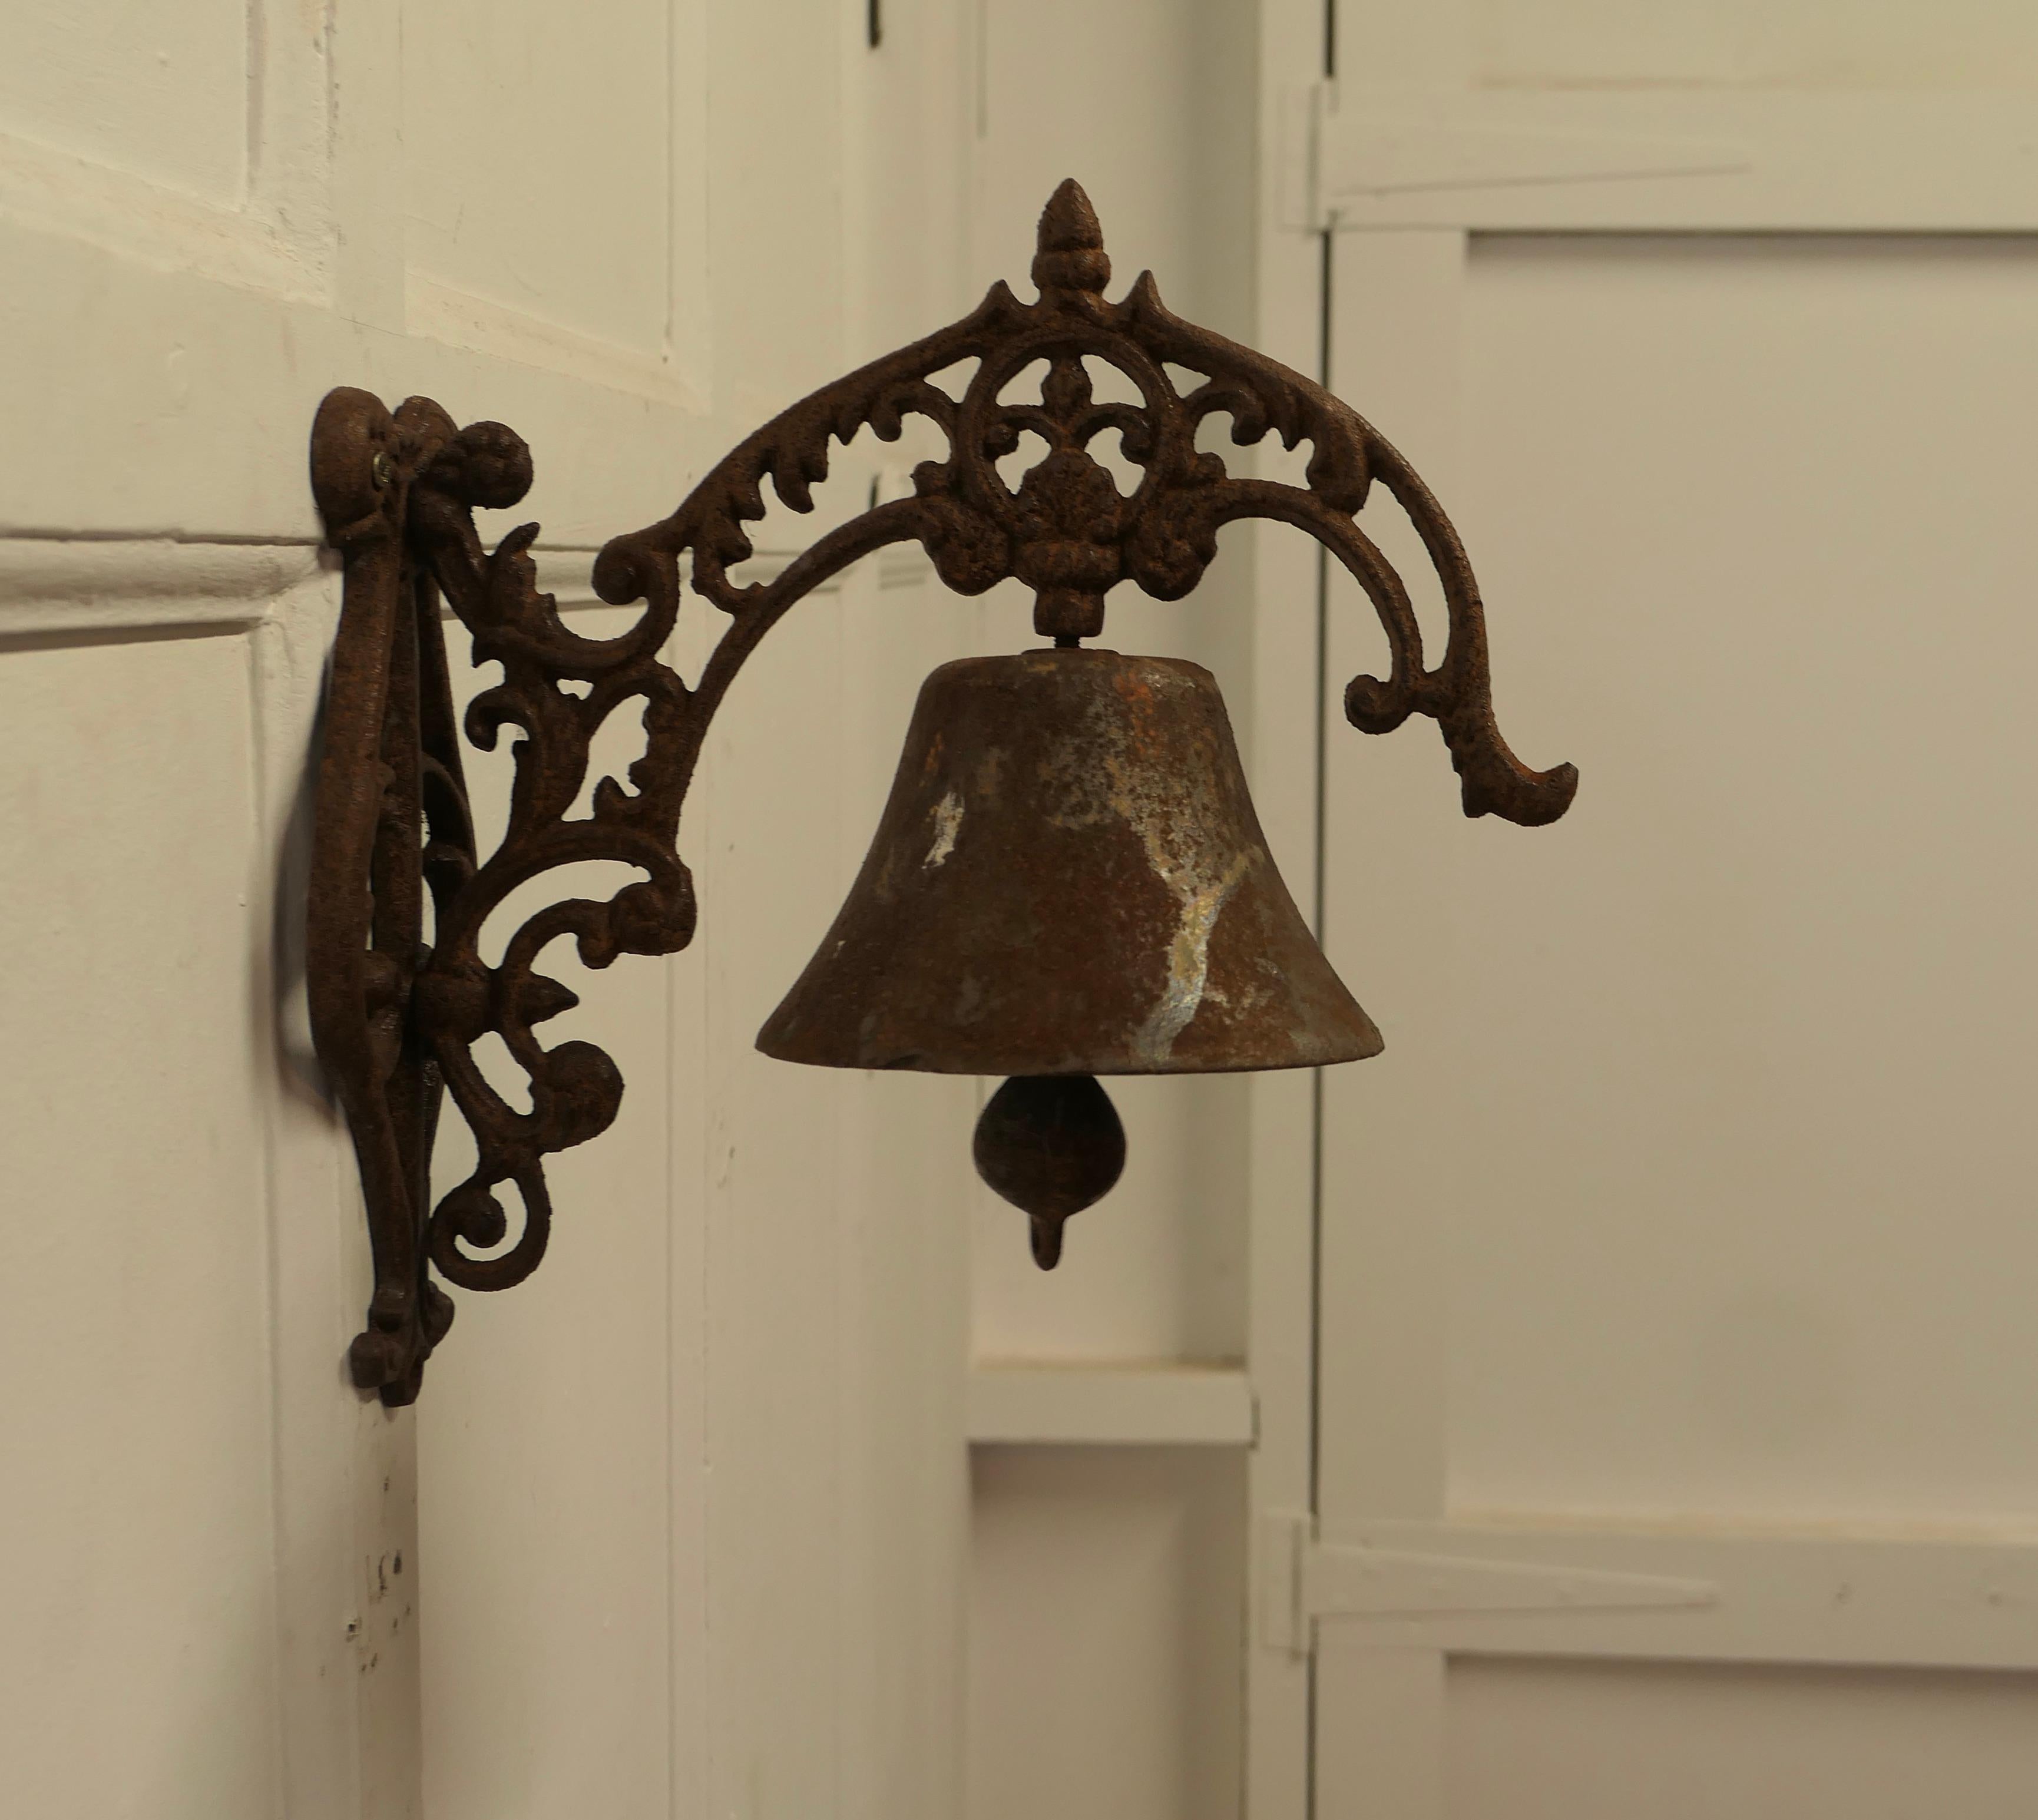  Cast Iron Out Door Bell on Bracket 

This is well weathered out Door Bull Bell on a decorative iron wall bracket, this is a good bell complete with clapper, it is in a weathered condition, it is loud and would work well as a door bell or to call